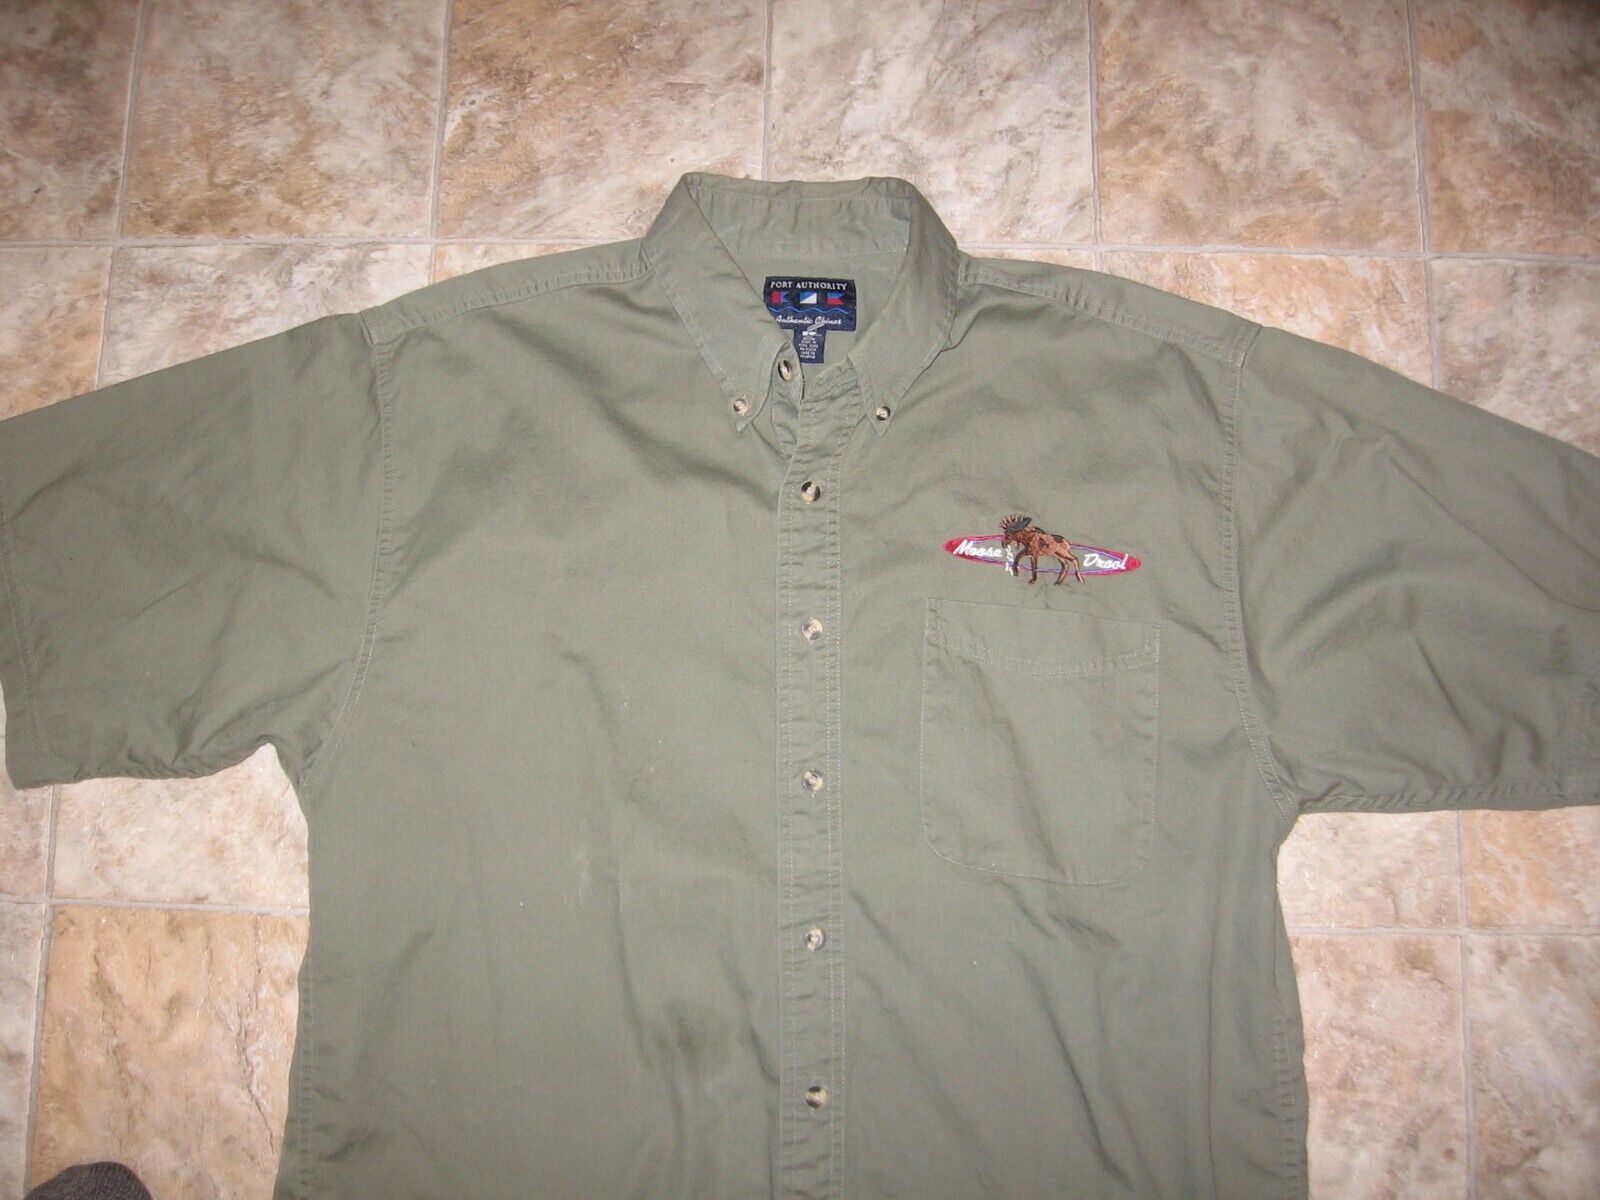 MOOSE DROOL BEER SALESMAN GREEN SHORT SLEEVE BUTTON DOWN EMBROIDERED SHIRT